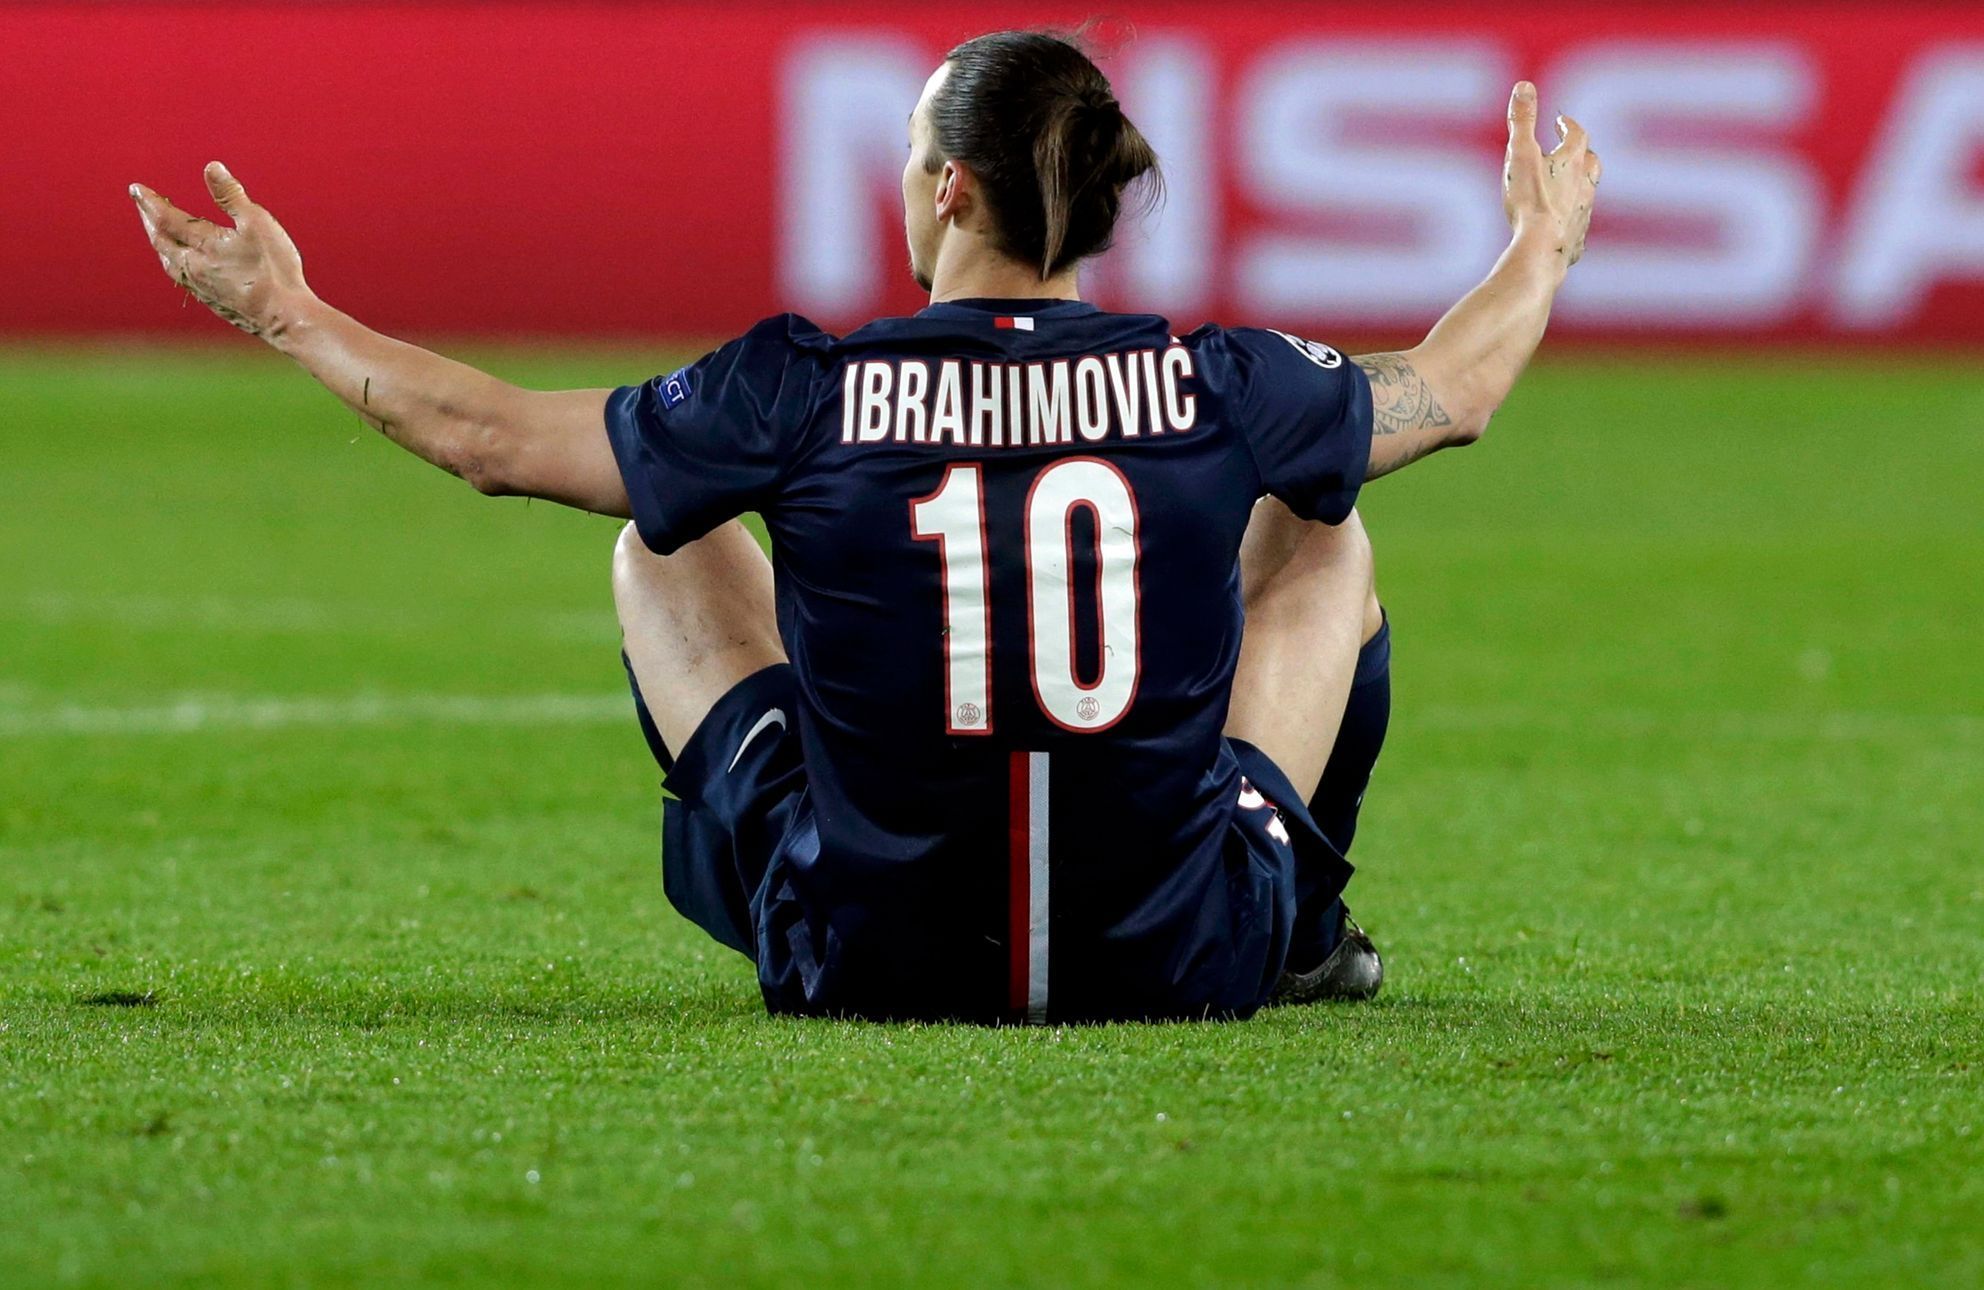 Paris St Germain's Ibrahimovic reacts during the Champions League round of 16 first leg soccer match against Chelsea at the Parc des Princes Stadium in Paris